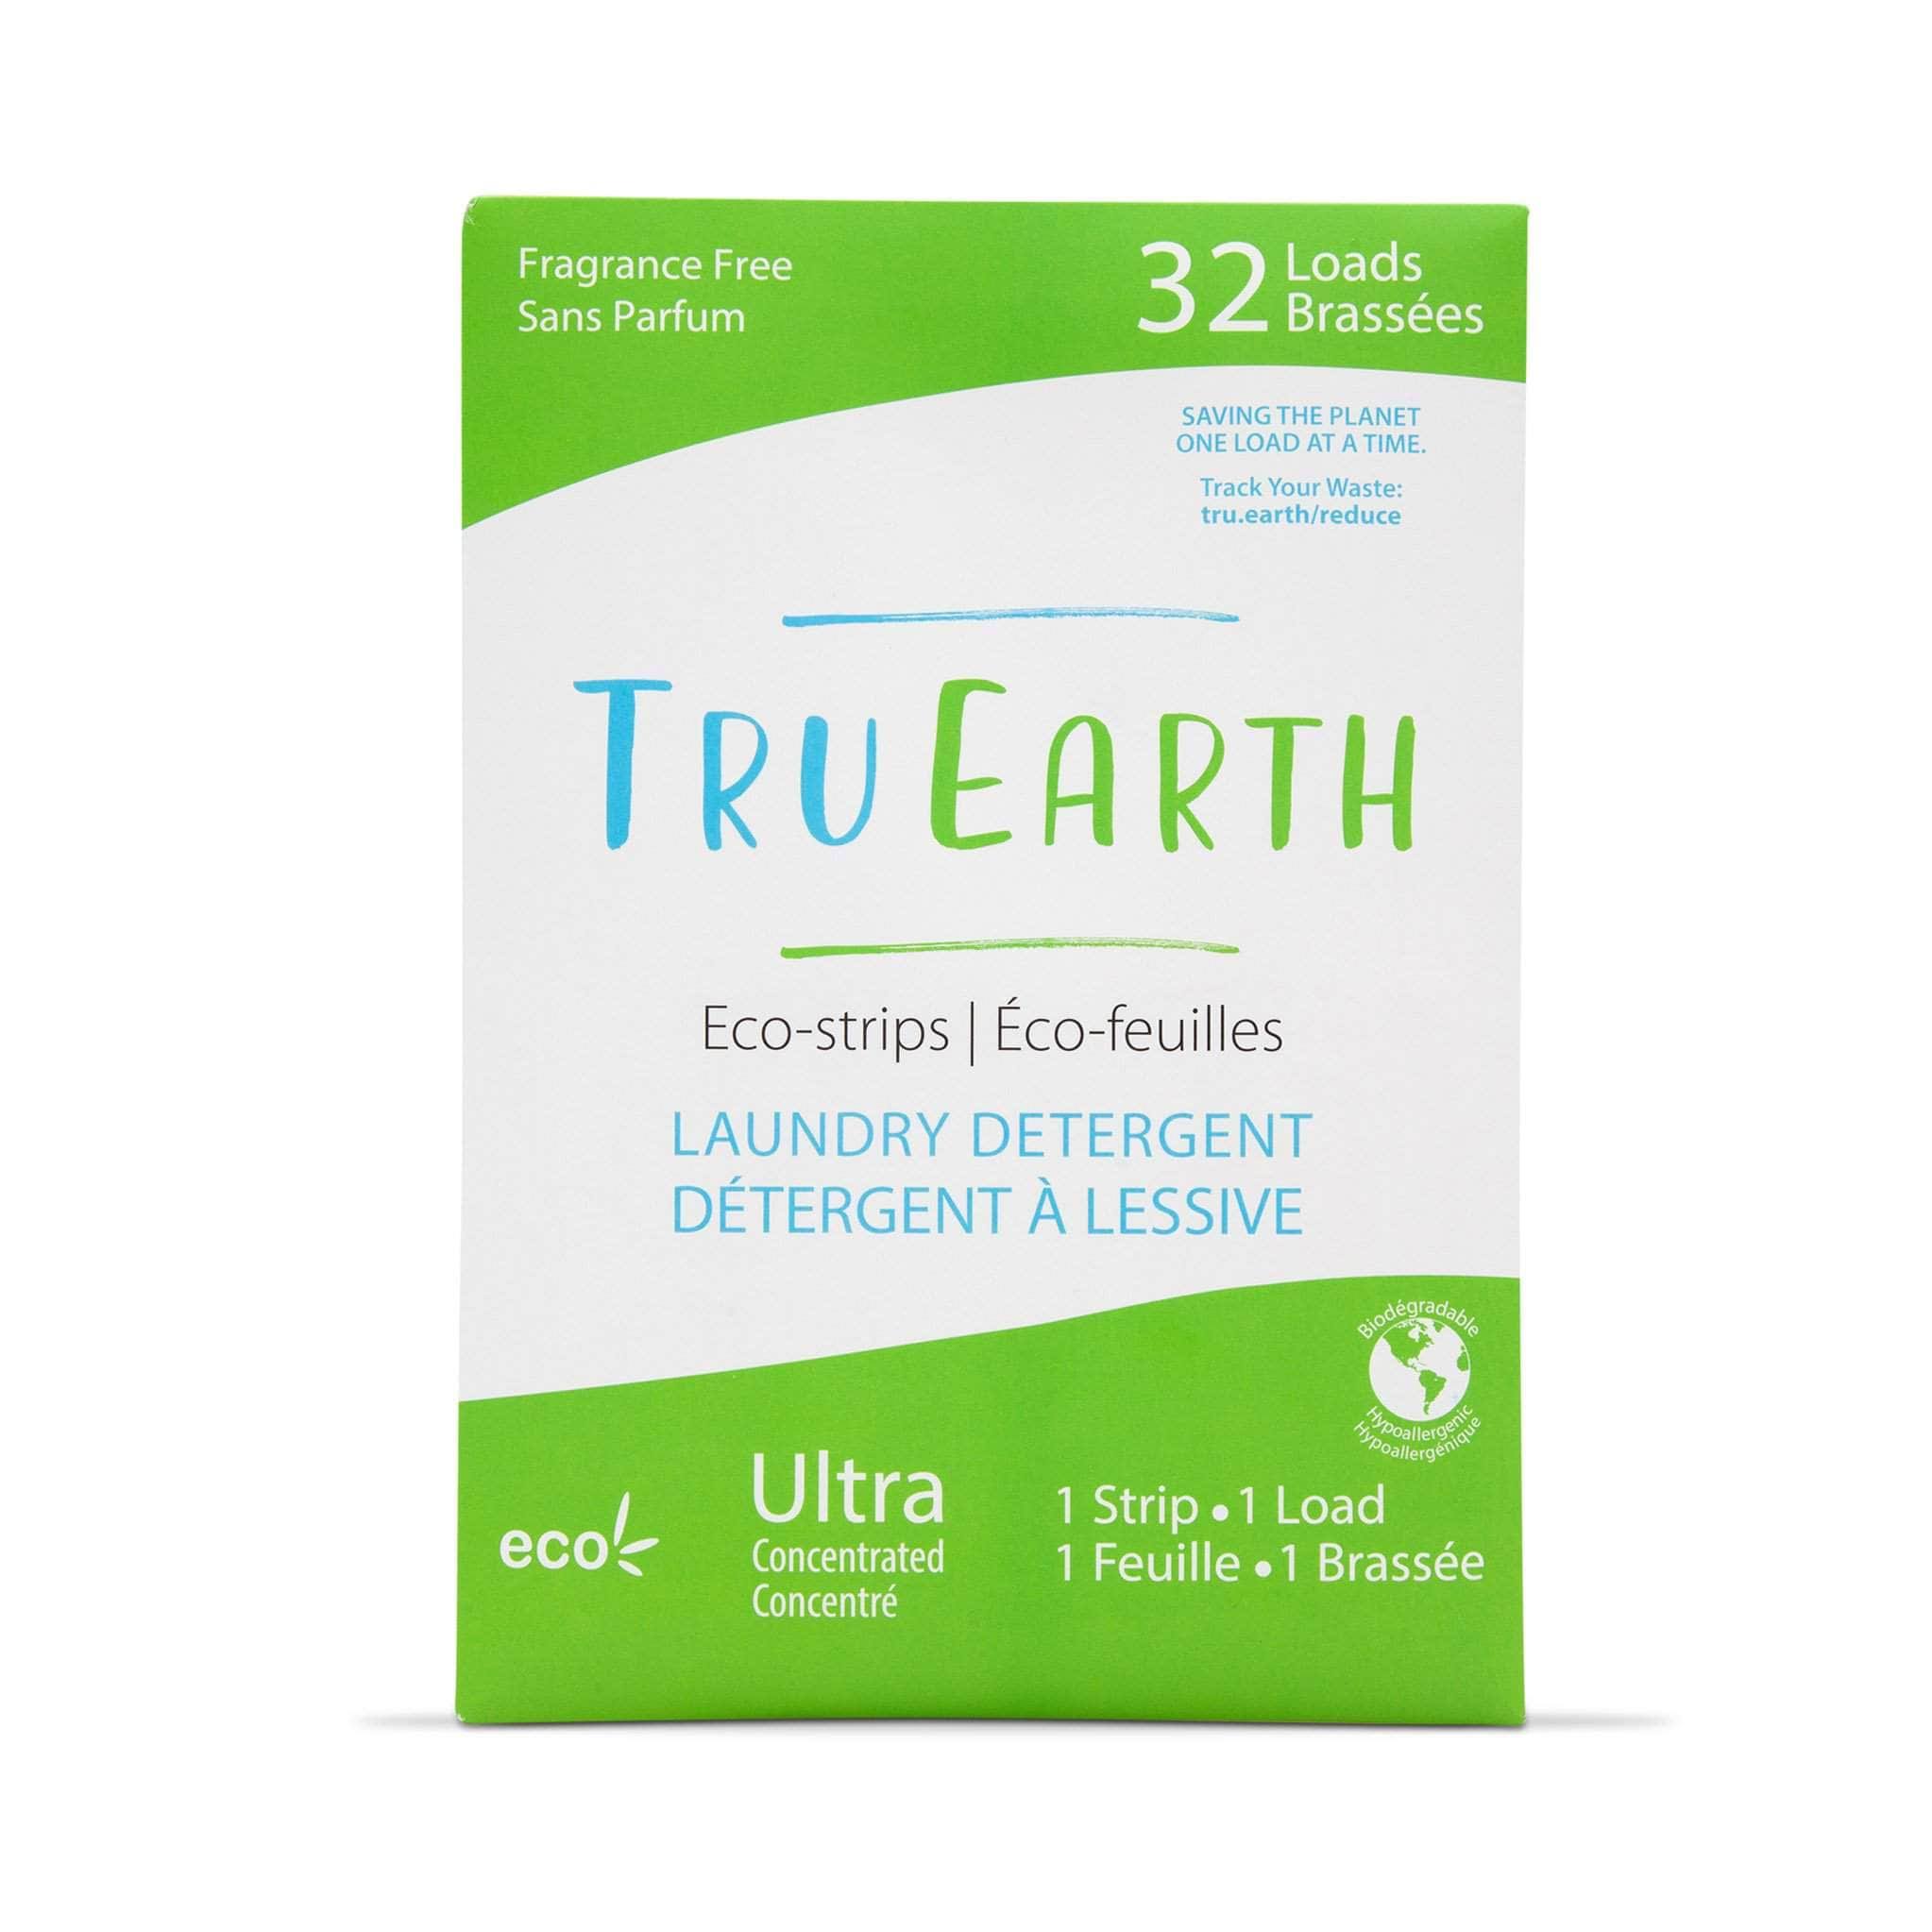 TRU Earth Eco-Strips Laundry Detergent Fragrance Free